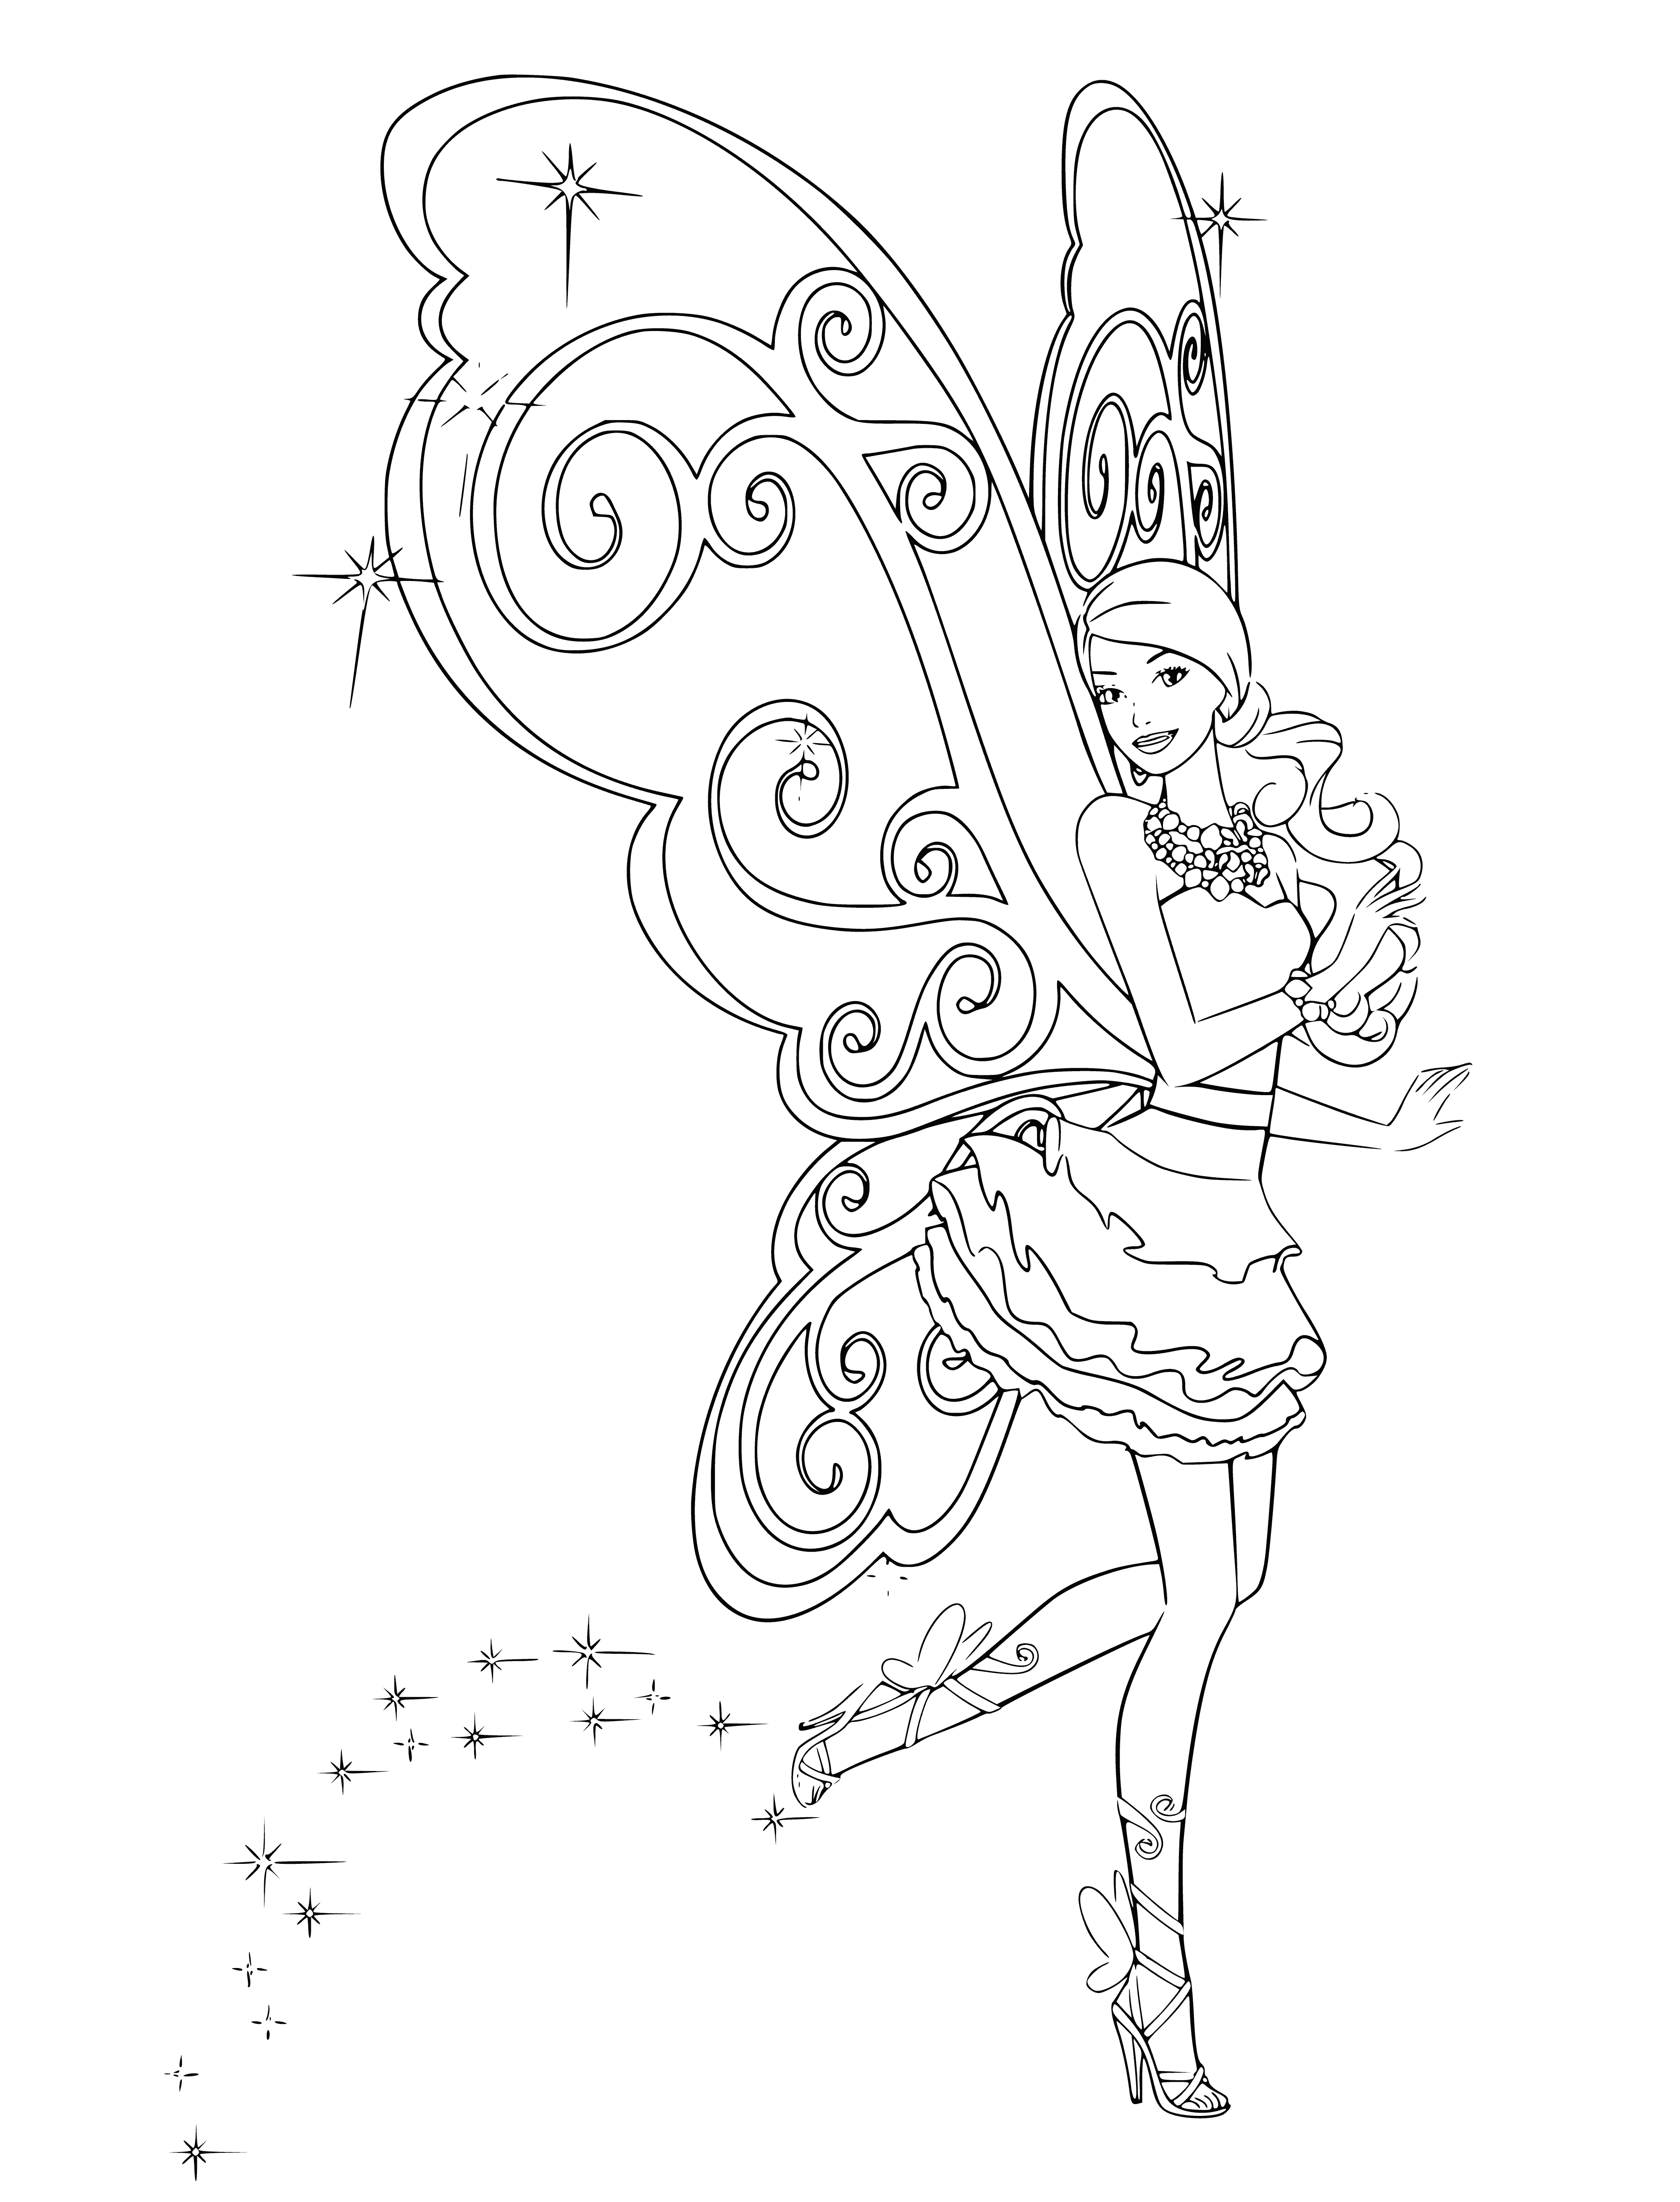 Fairy barbie coloring page